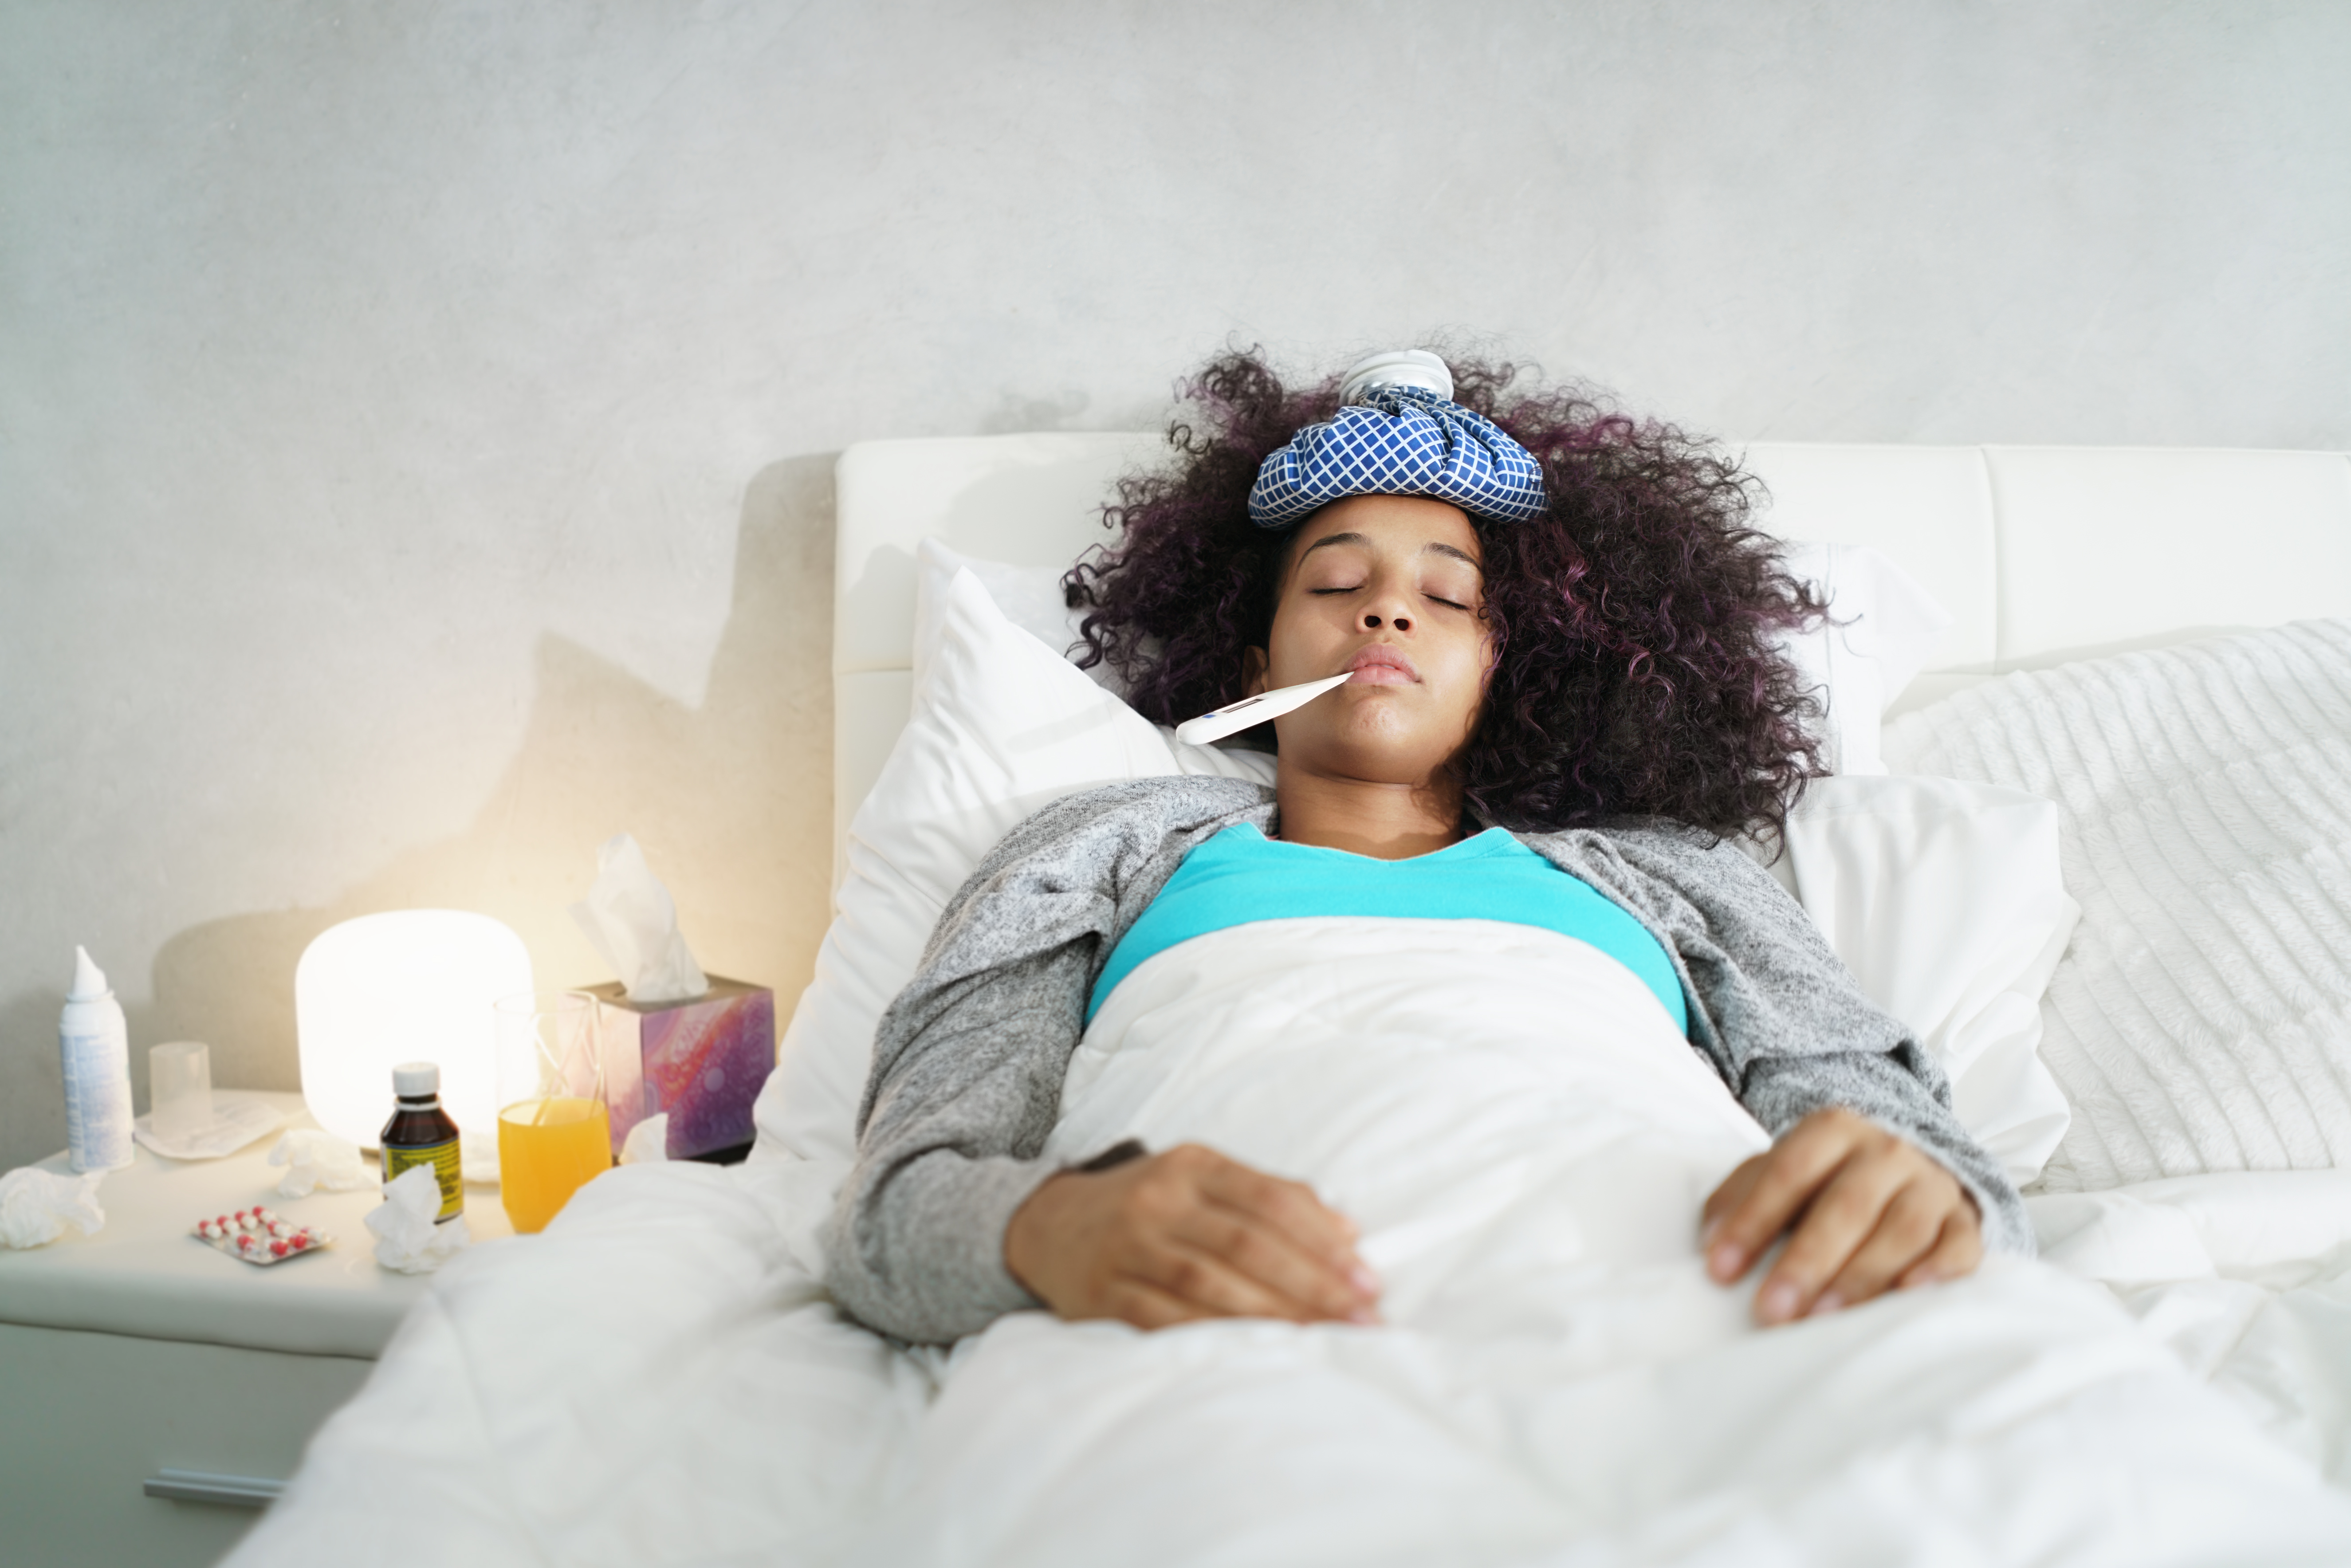 Woman With Fever Using Thermometer And Resting in Bed